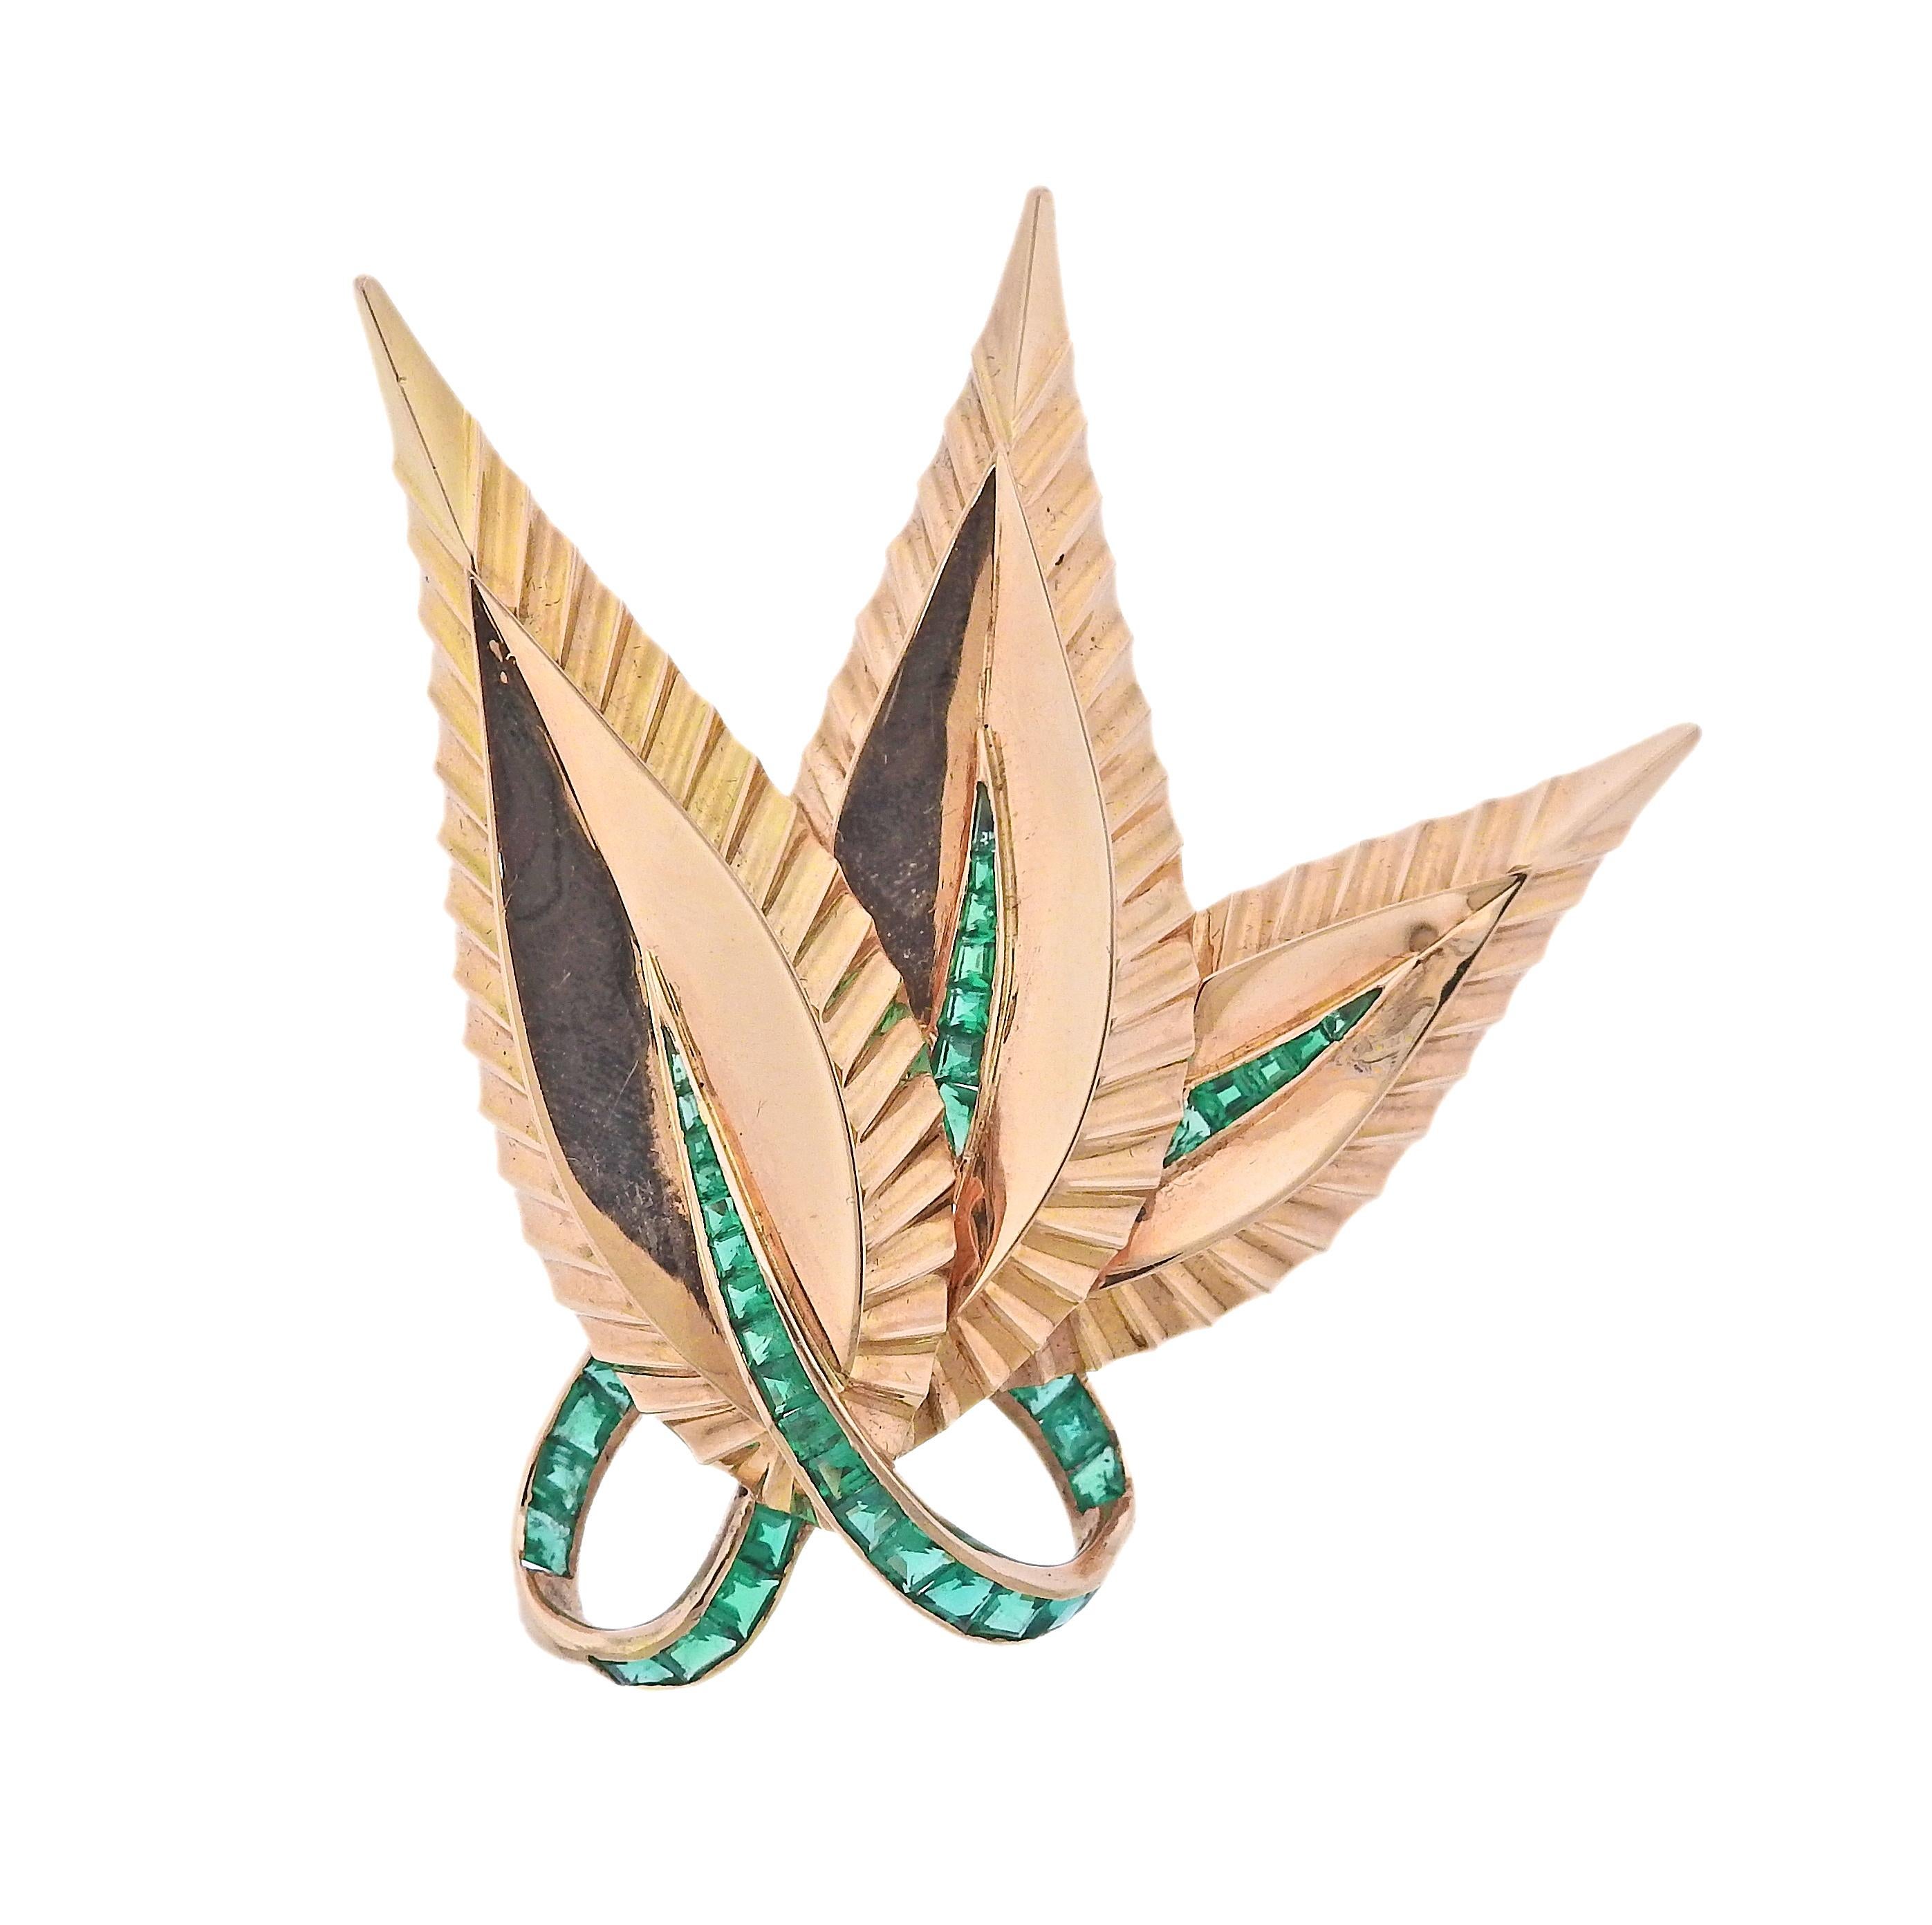 18k yellow gold brooch/pendant by Paul Flato, depicting leaves, decorated with vibrant emeralds. Brooch measures 2.5